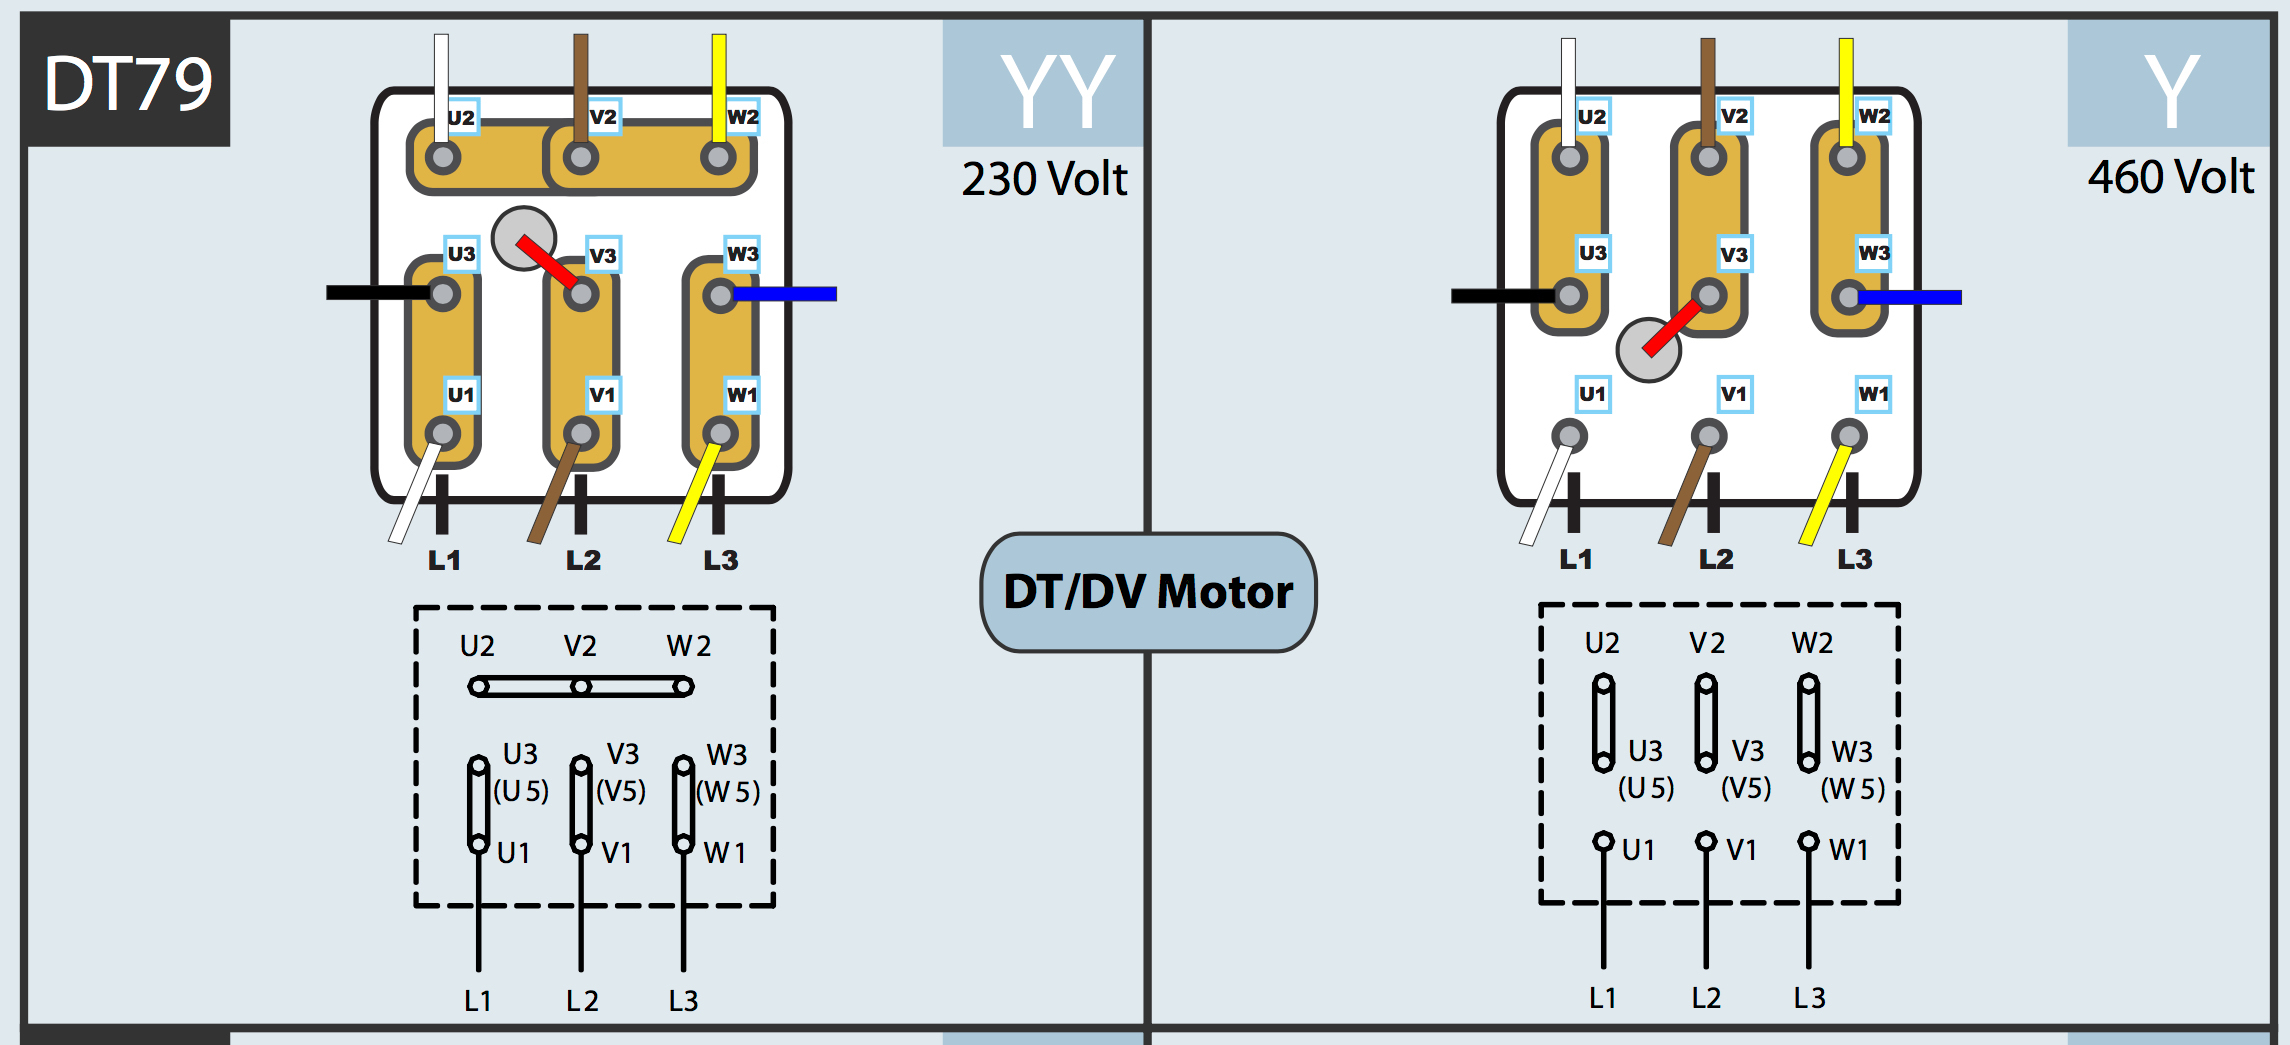 Wiring Electric Motor For Dual Belt Conveyors | Tommy Support - Electric Motor Wiring Diagram